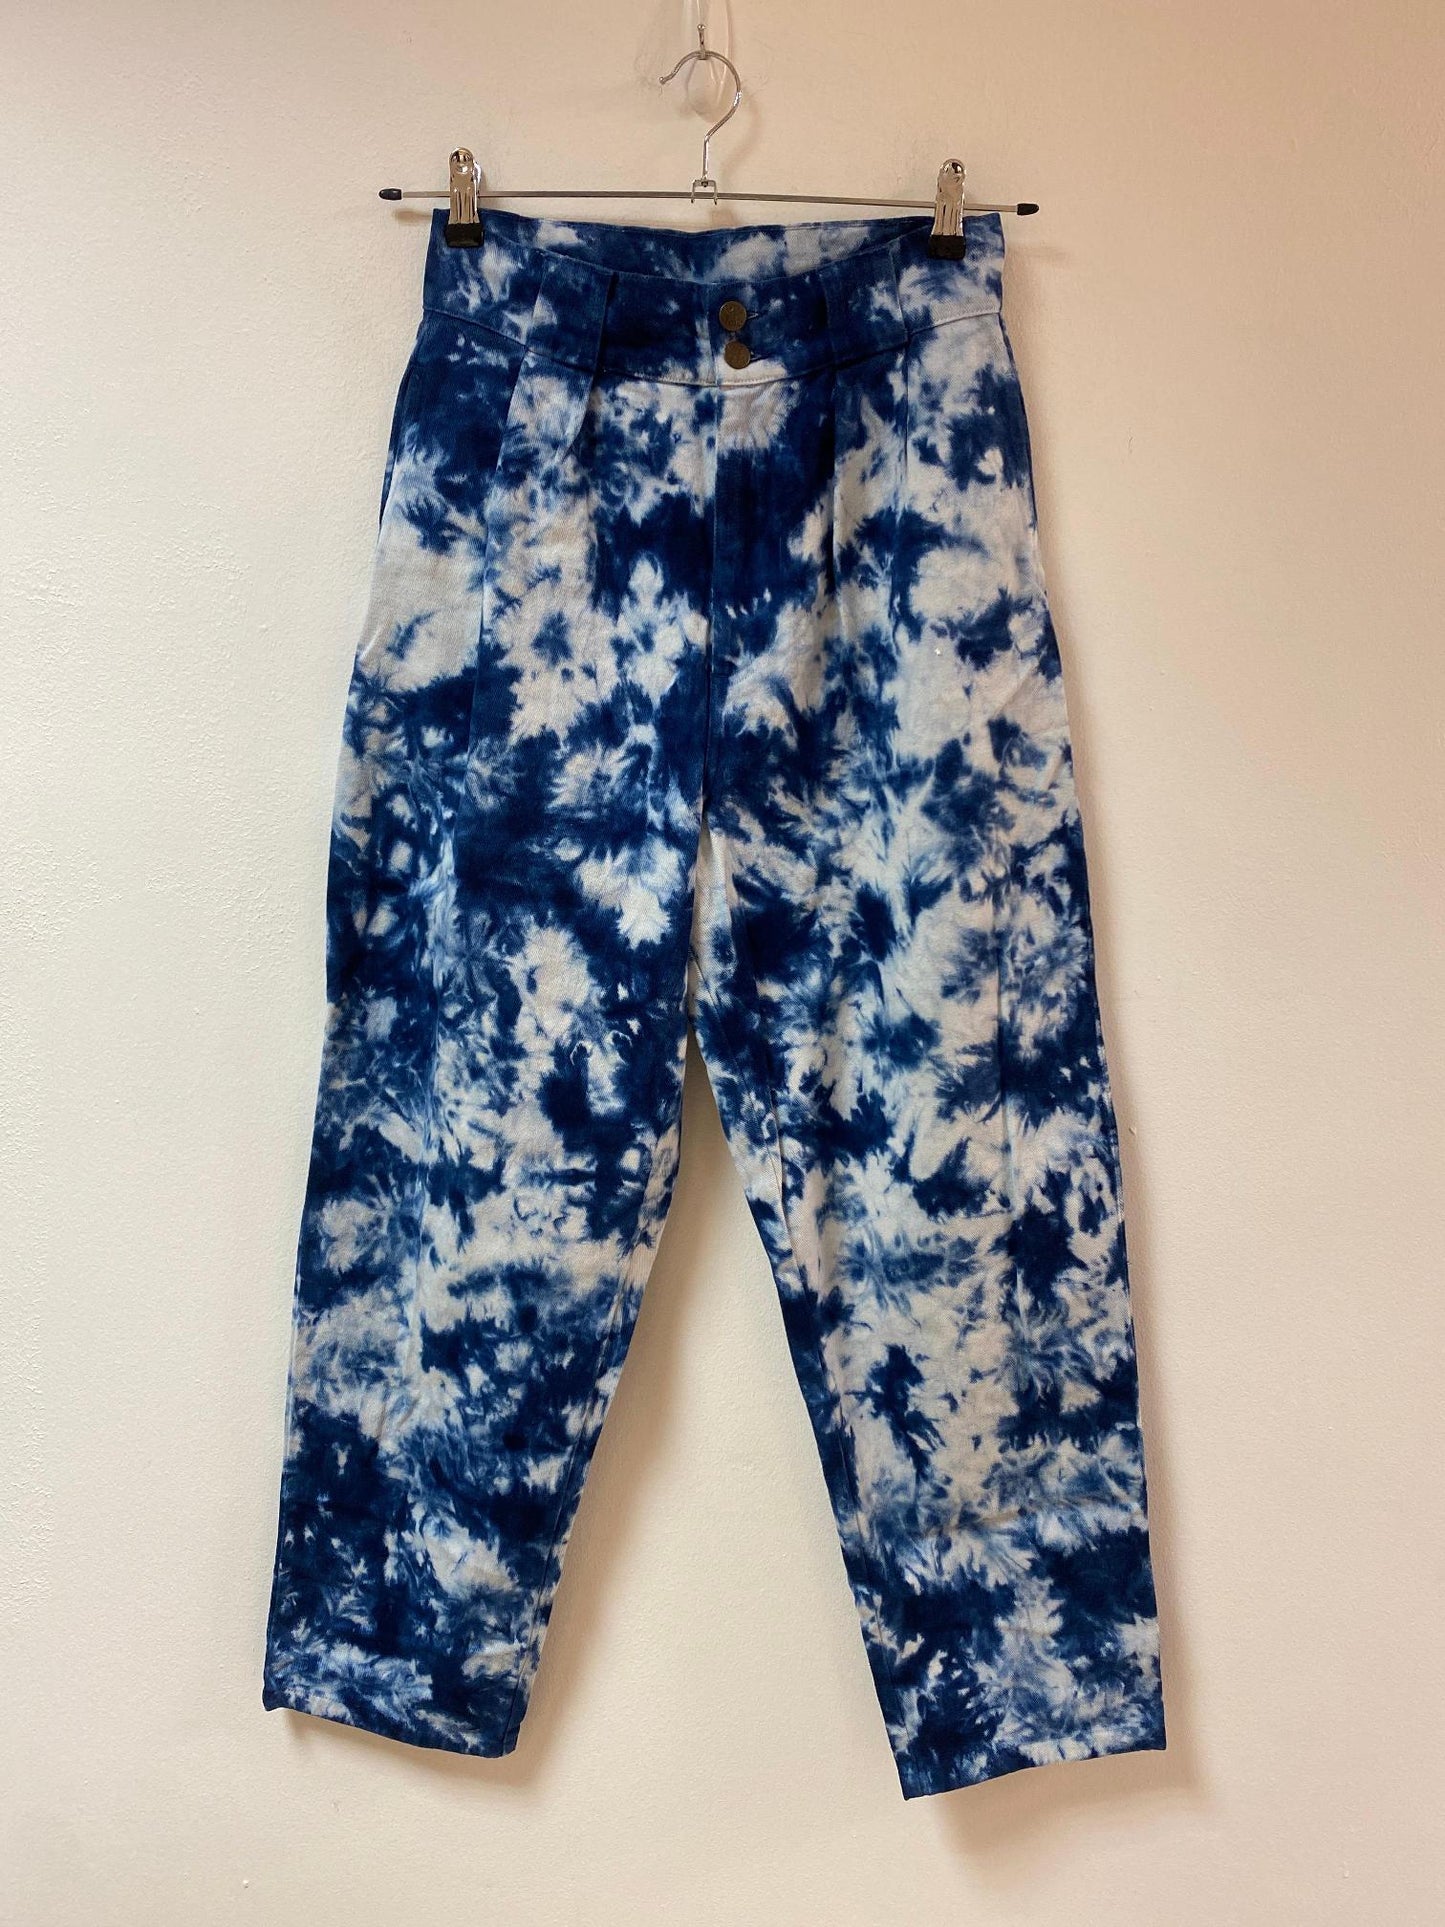 Blue and white tie dye pattern Jeans, Lucy & Yak, size 12 - Damaged Item Sale